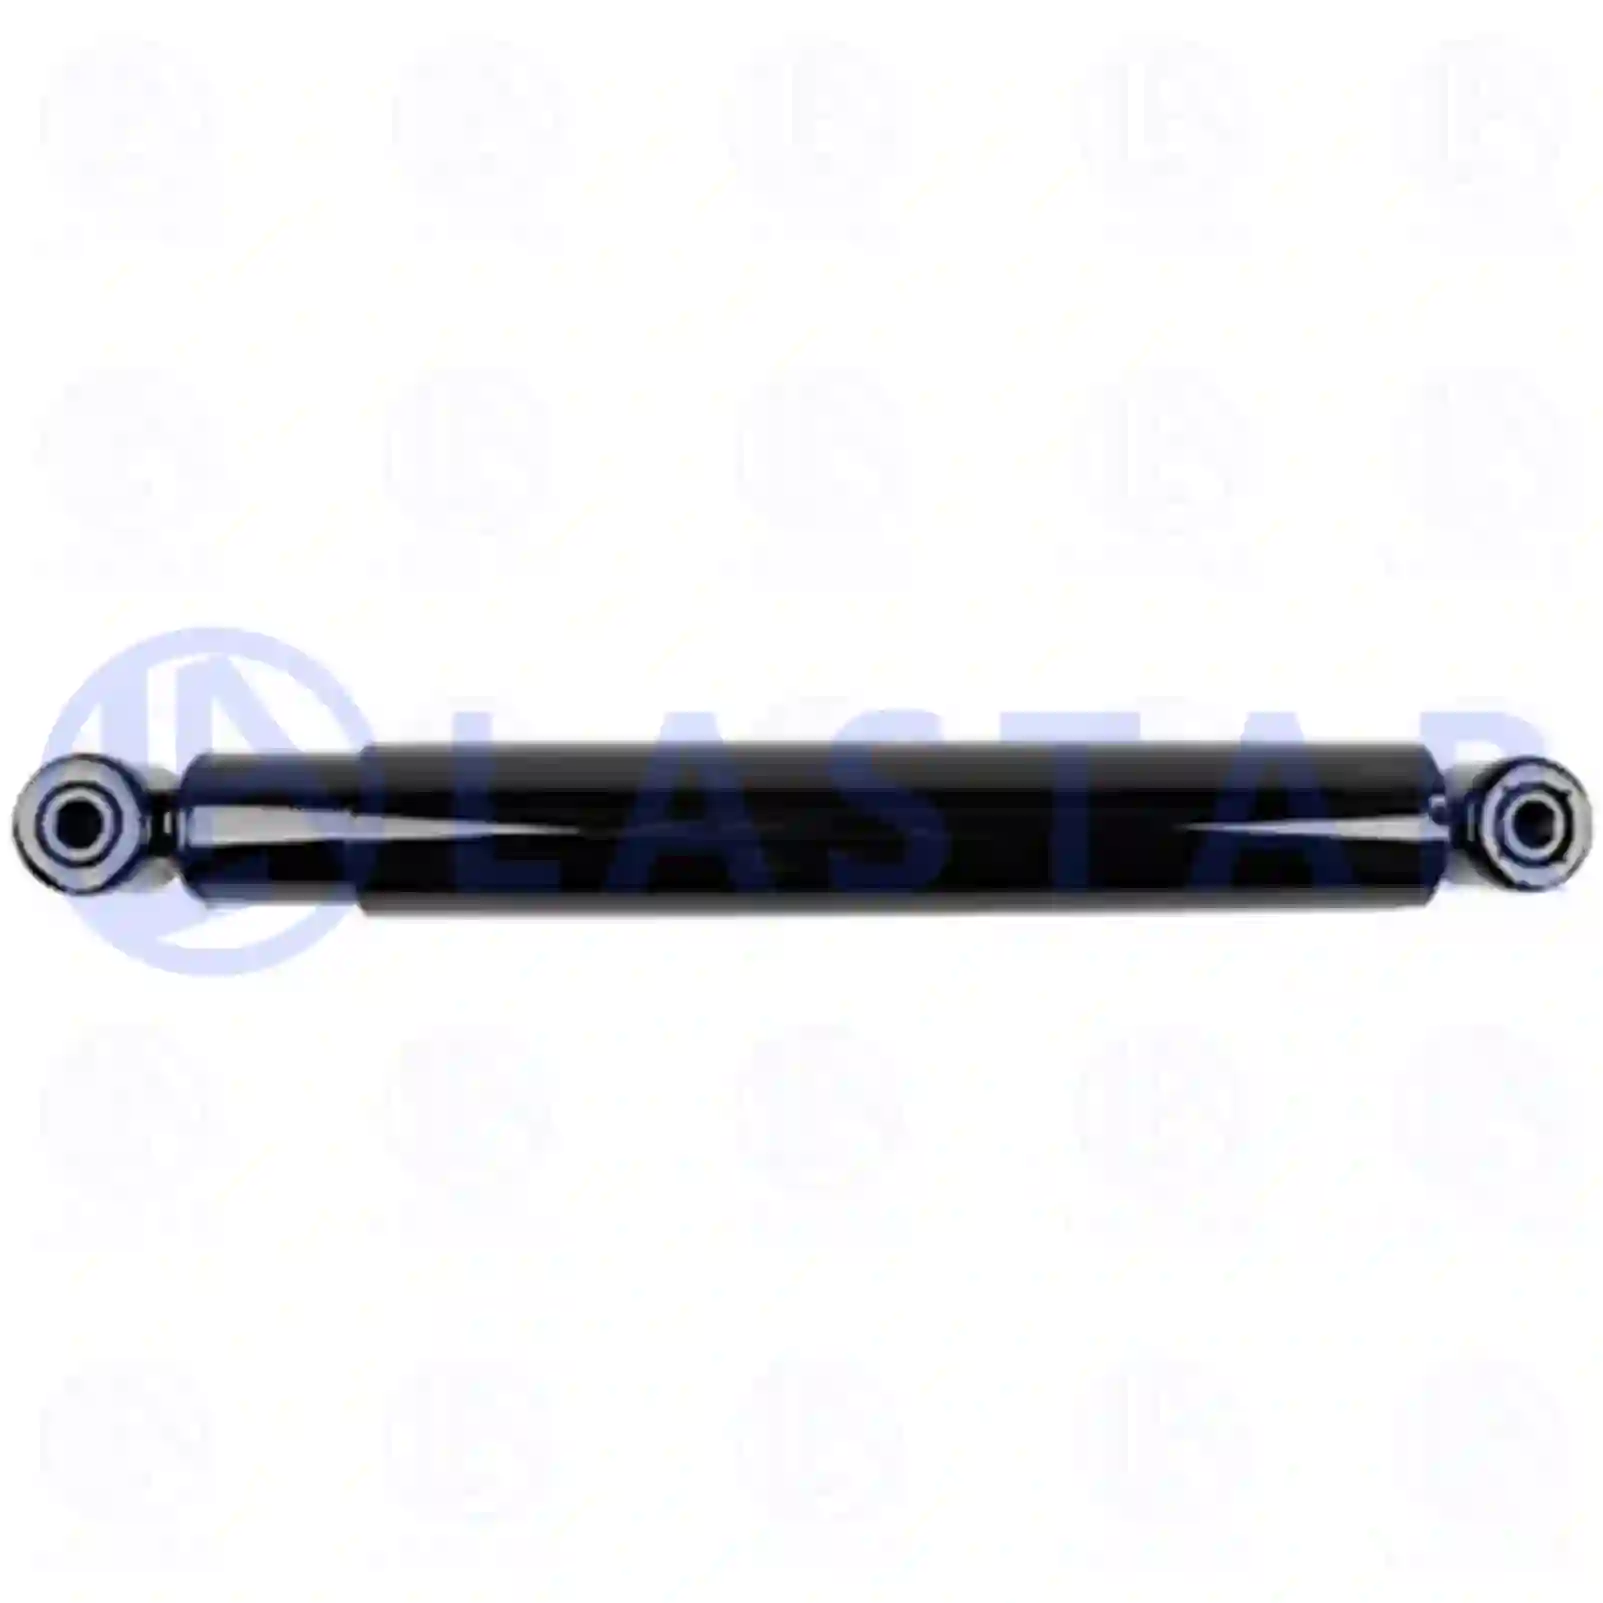 Shock absorber, 77727847, 0053239700, 0063232100, 0063233800, 0063237200, 0073231200, 3753230100, 3753232100 ||  77727847 Lastar Spare Part | Truck Spare Parts, Auotomotive Spare Parts Shock absorber, 77727847, 0053239700, 0063232100, 0063233800, 0063237200, 0073231200, 3753230100, 3753232100 ||  77727847 Lastar Spare Part | Truck Spare Parts, Auotomotive Spare Parts